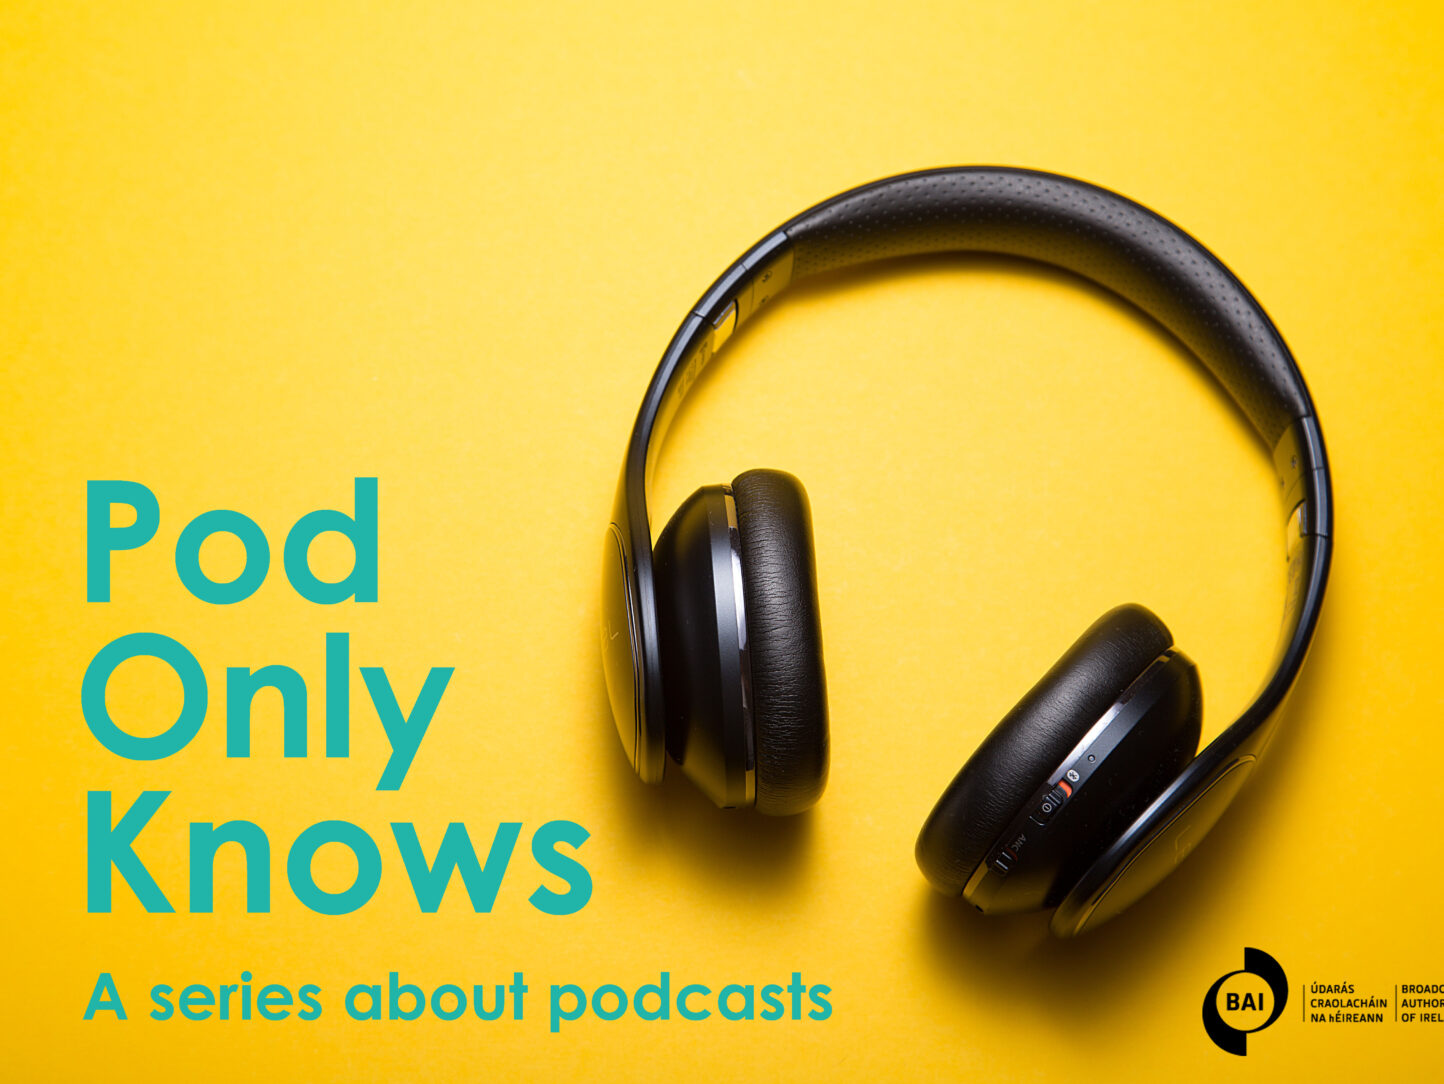 Pod Only Knows - a series about podcasts